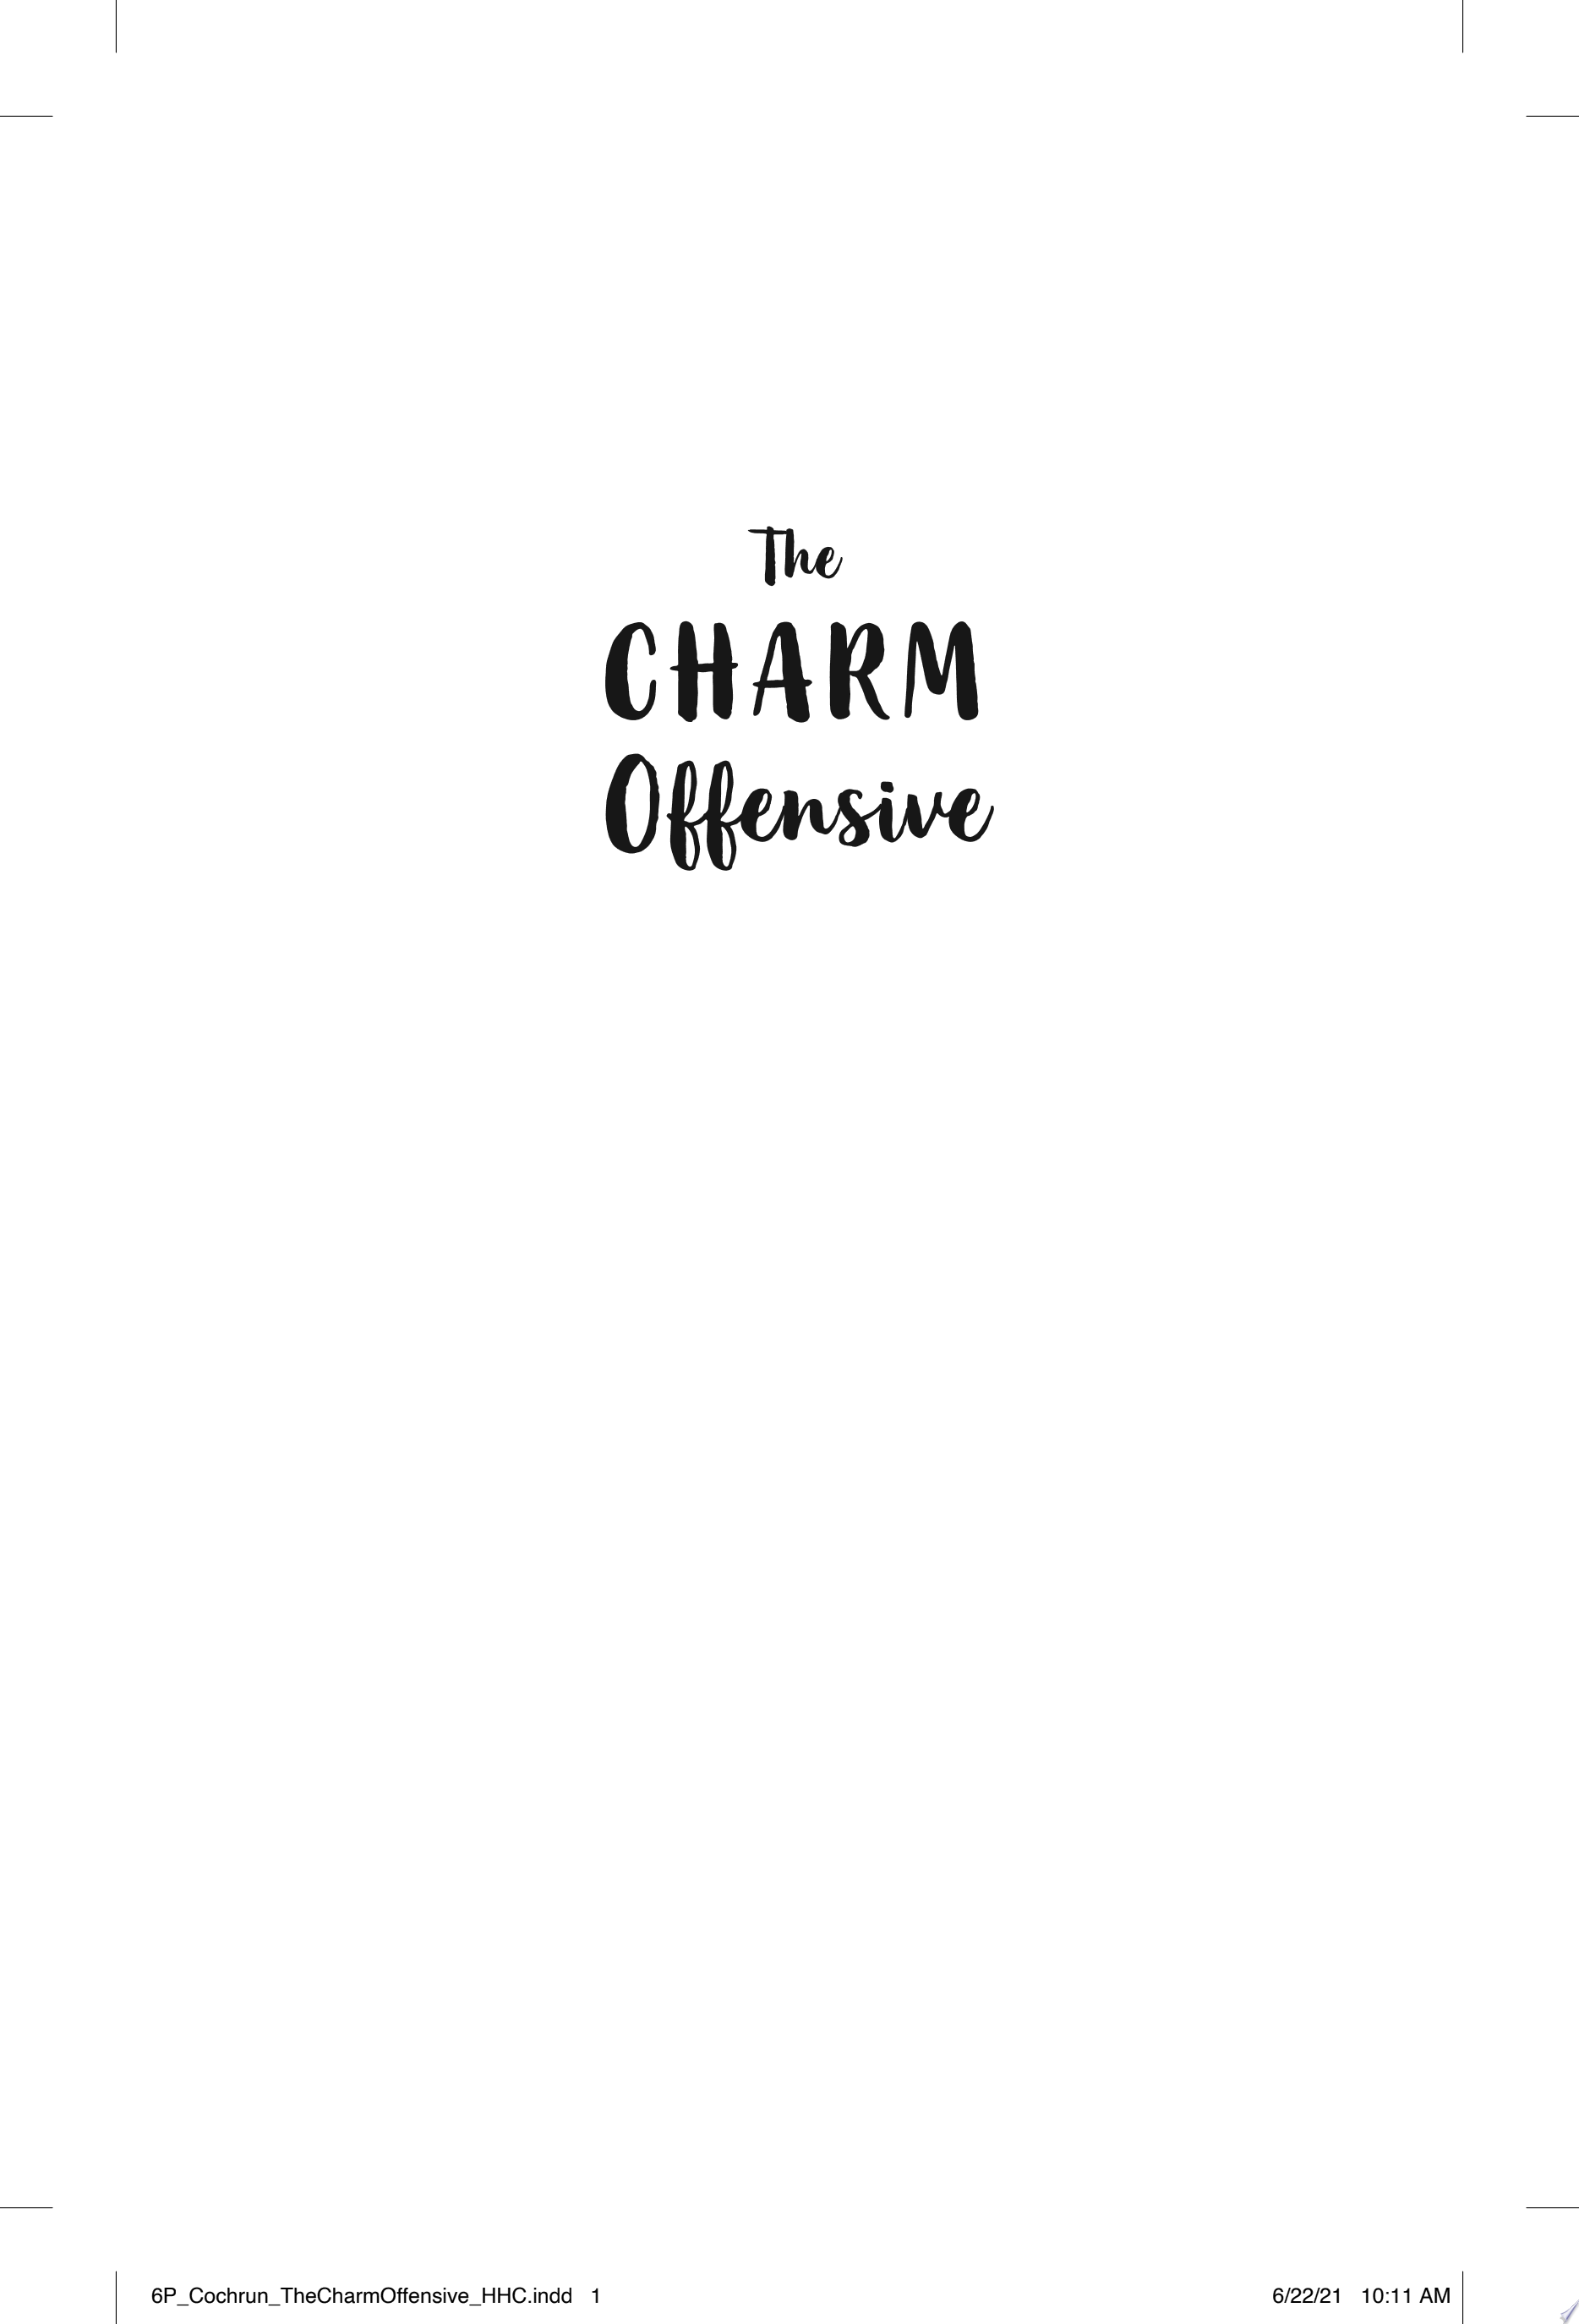 Image for "The Charm Offensive"